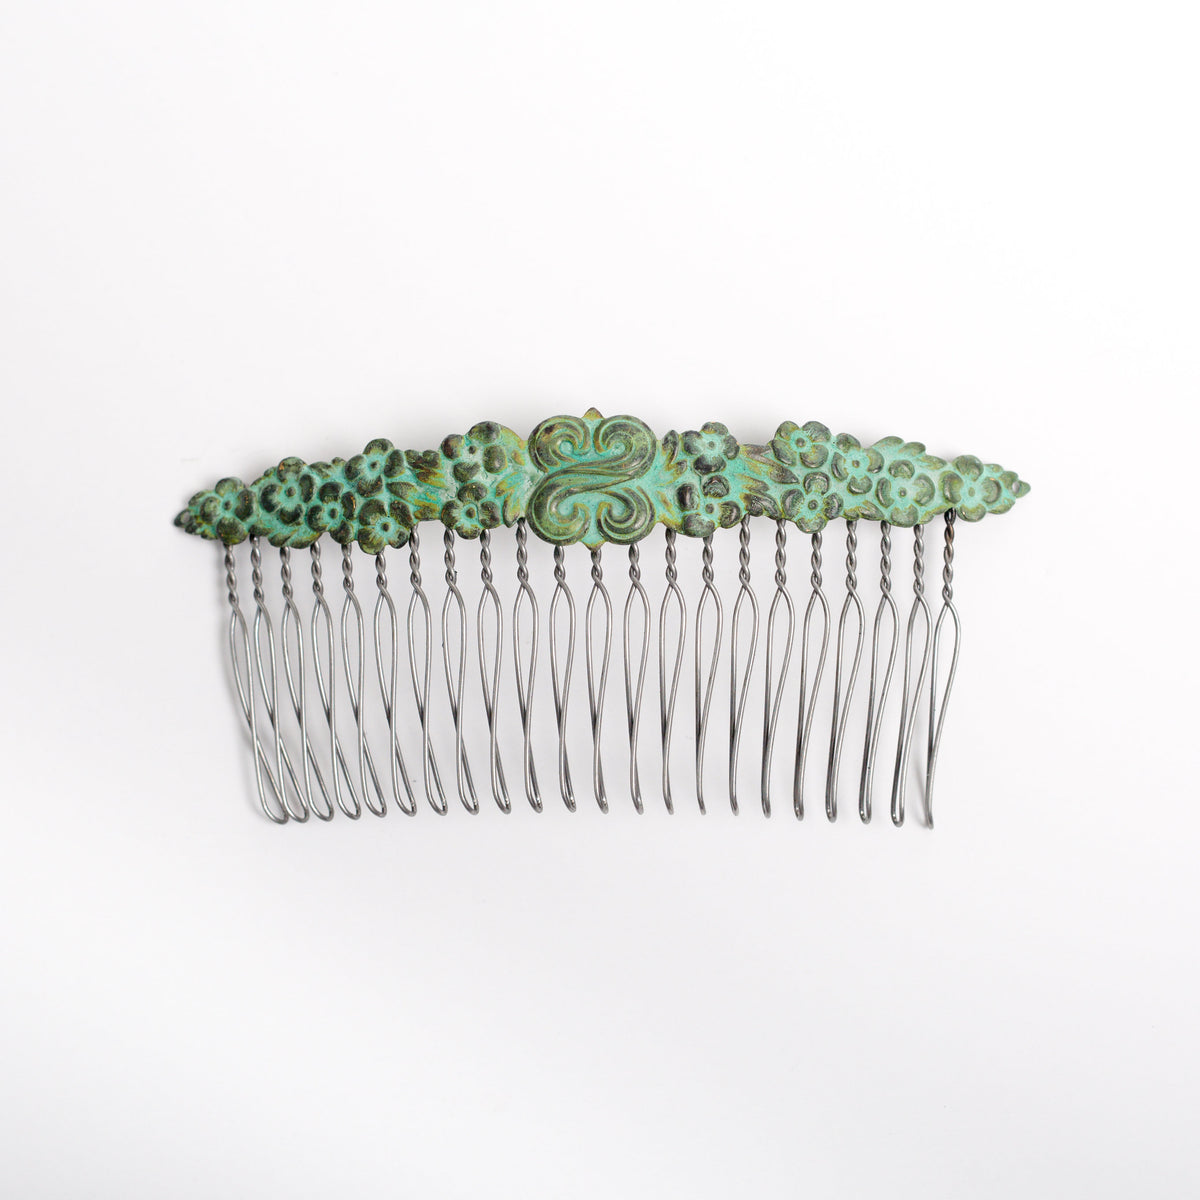 “Only Ornate” Hair Comb